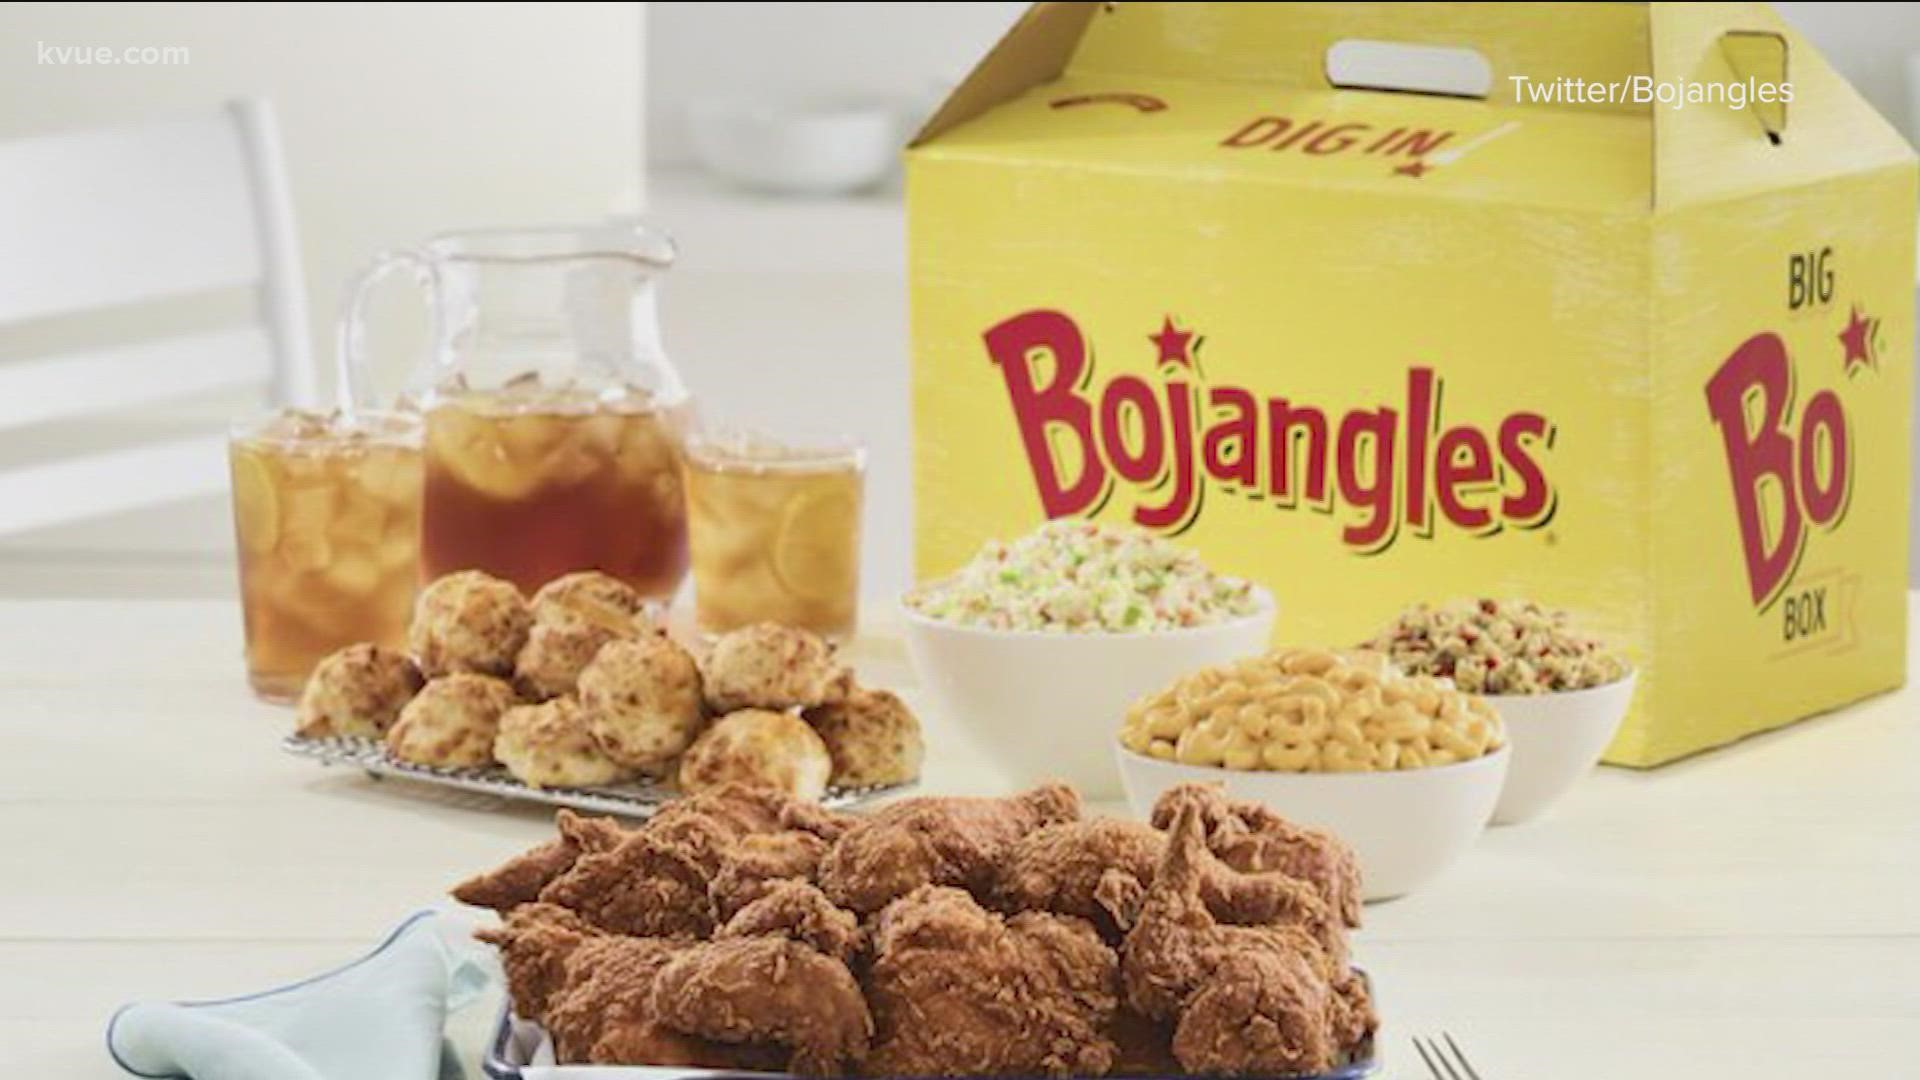 Bojangles, the popular North Carolina-based fried chicken chain, is reportedly expanding into the Lone Star State.